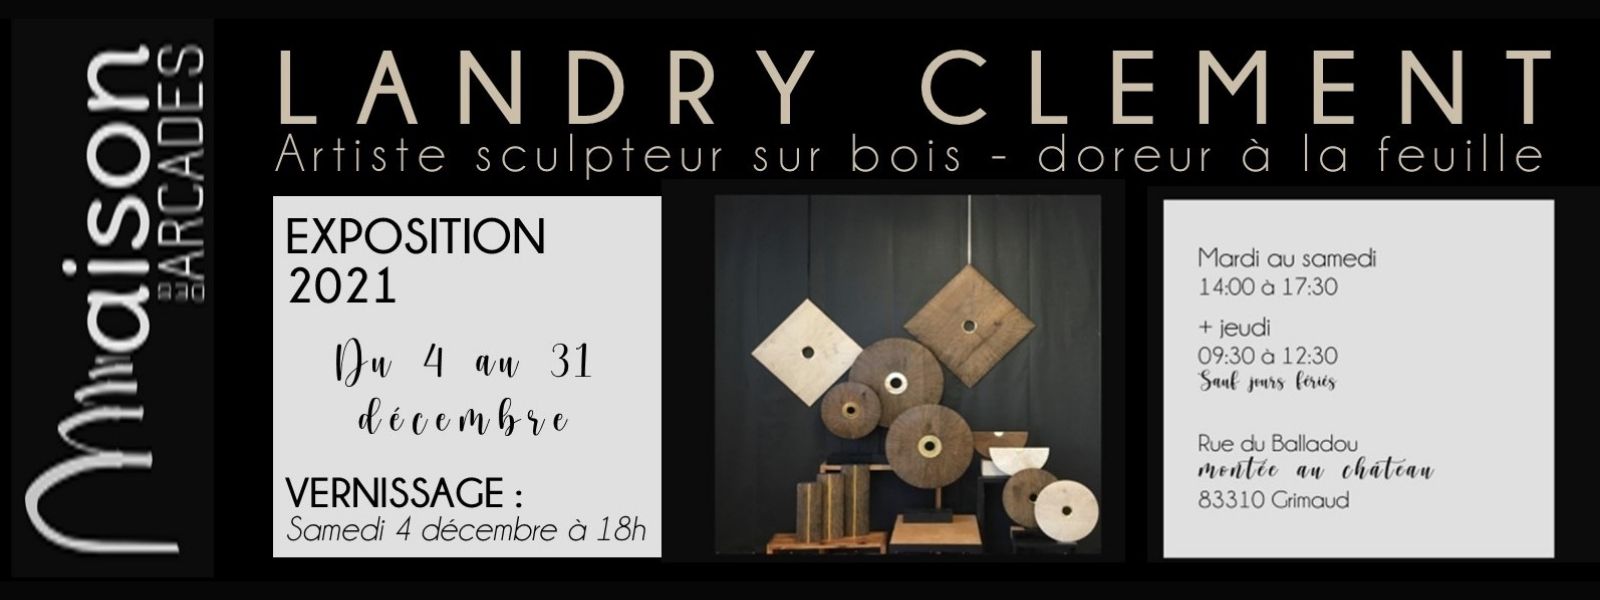 Saturday 04 December 2021: Landry CLEMENT exhibition opening